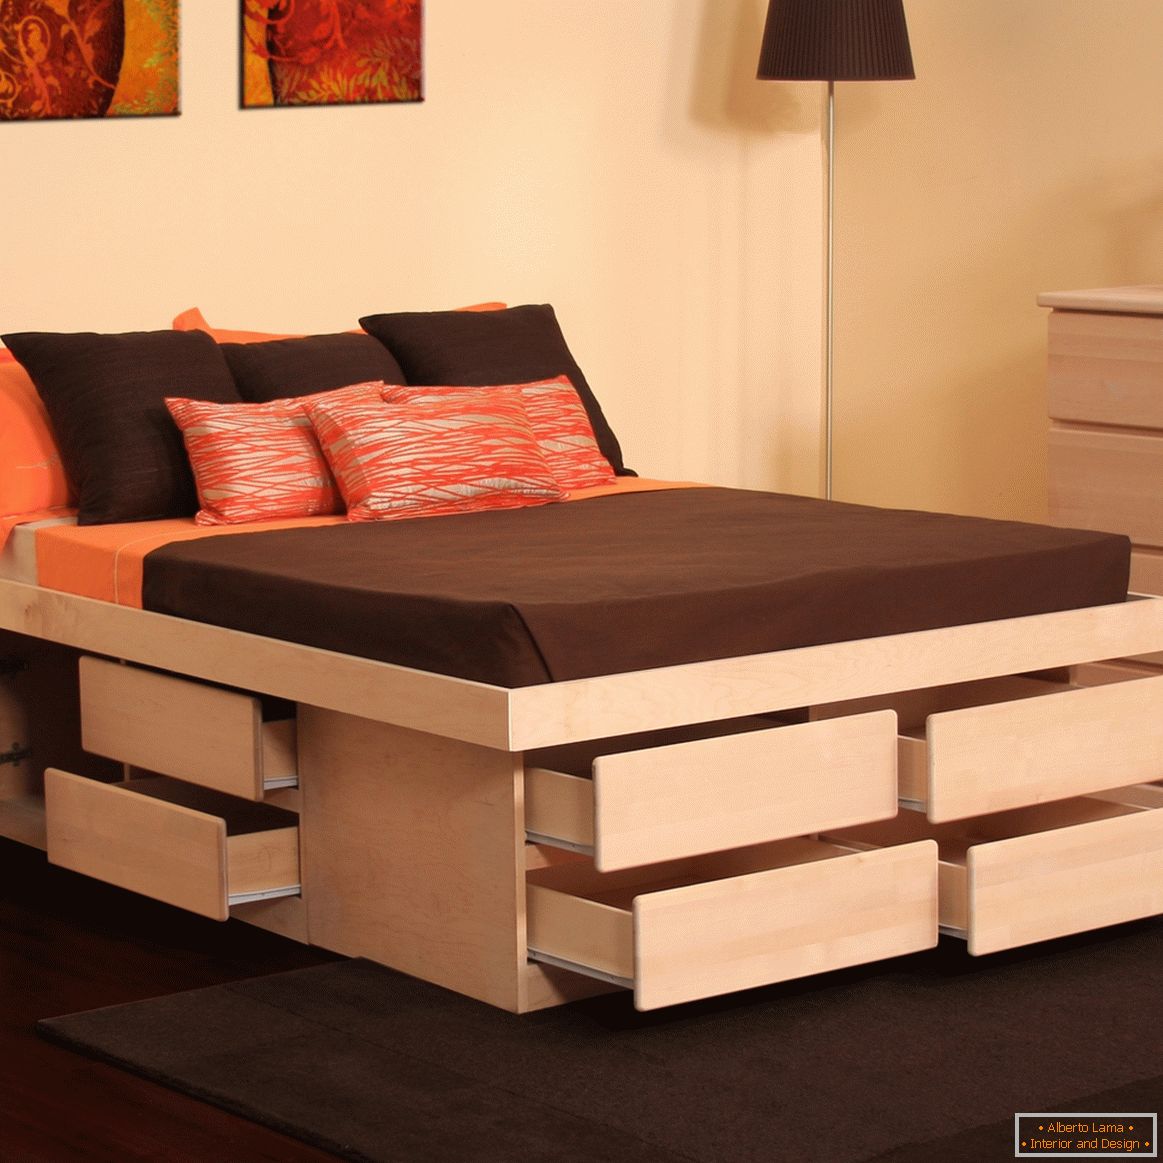 Bed with drawers